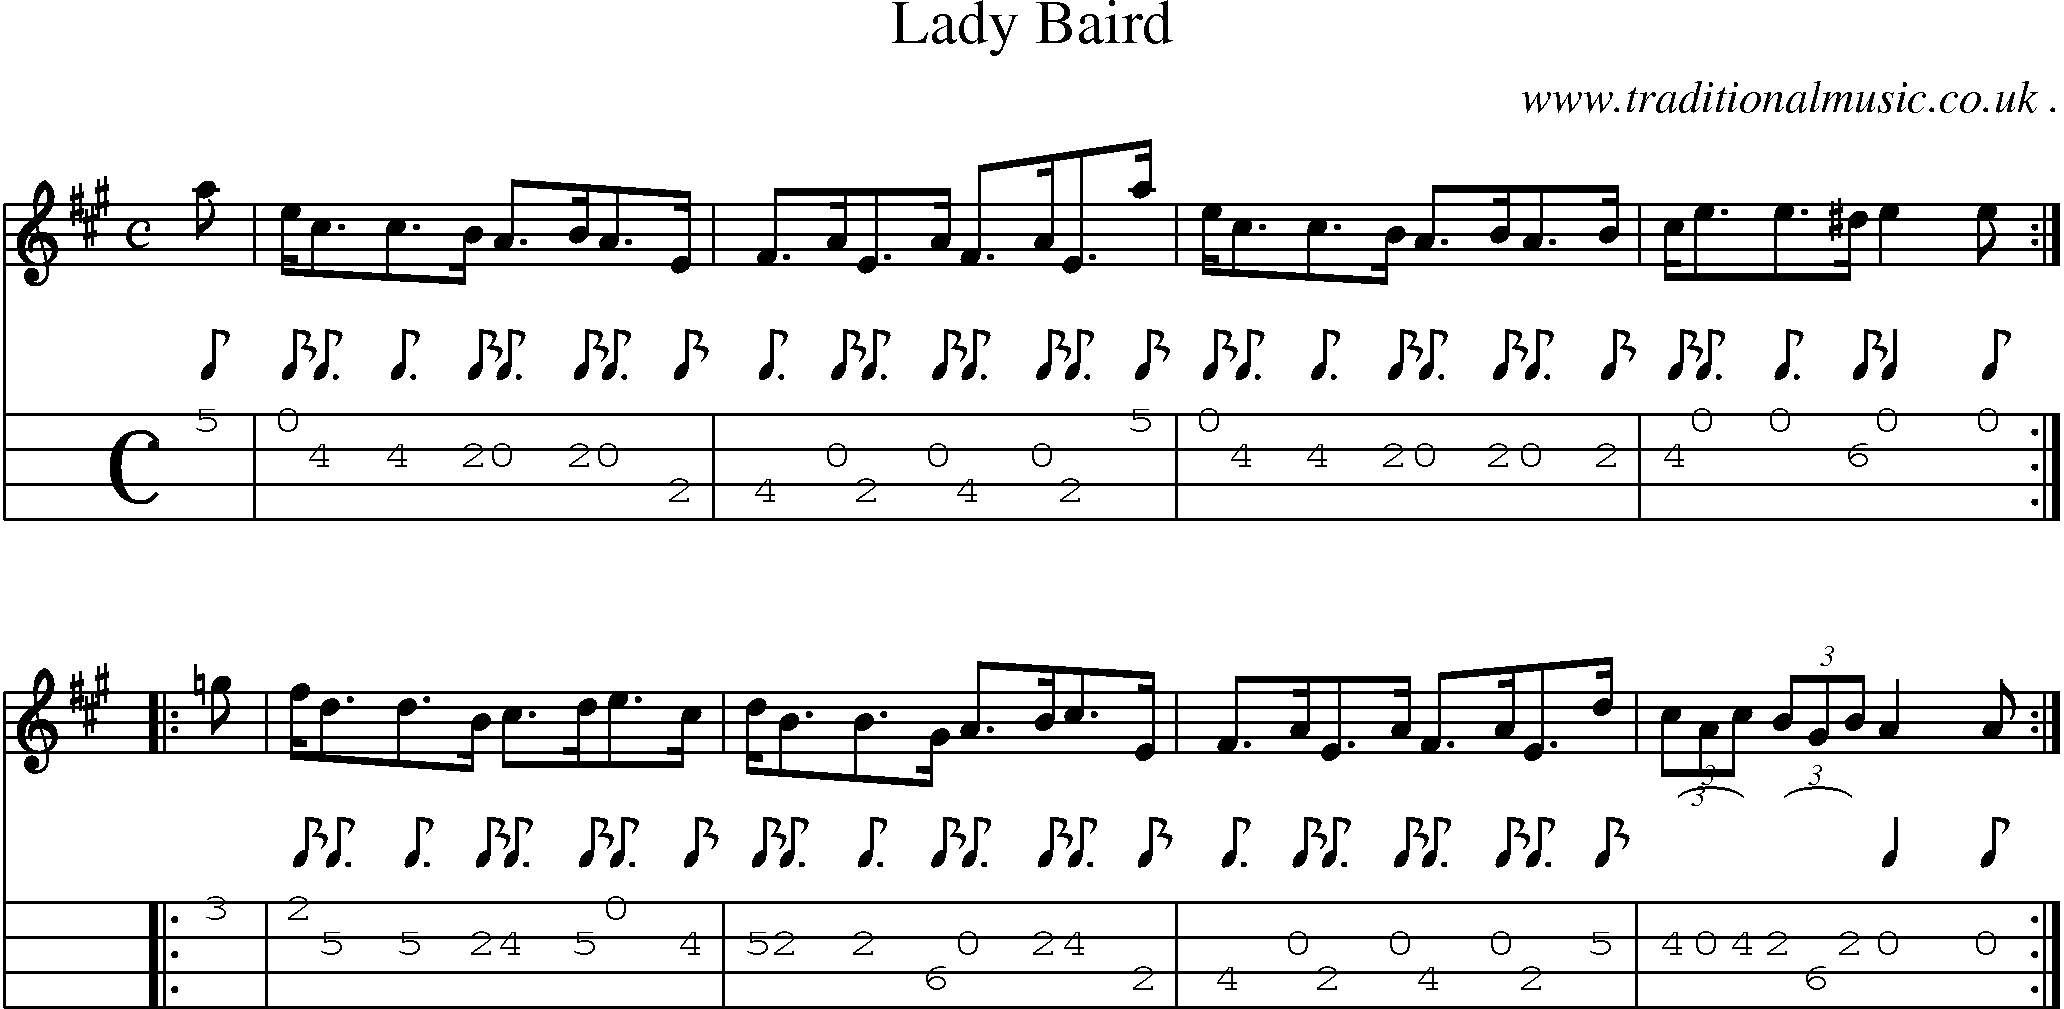 Sheet-music  score, Chords and Mandolin Tabs for Lady Baird